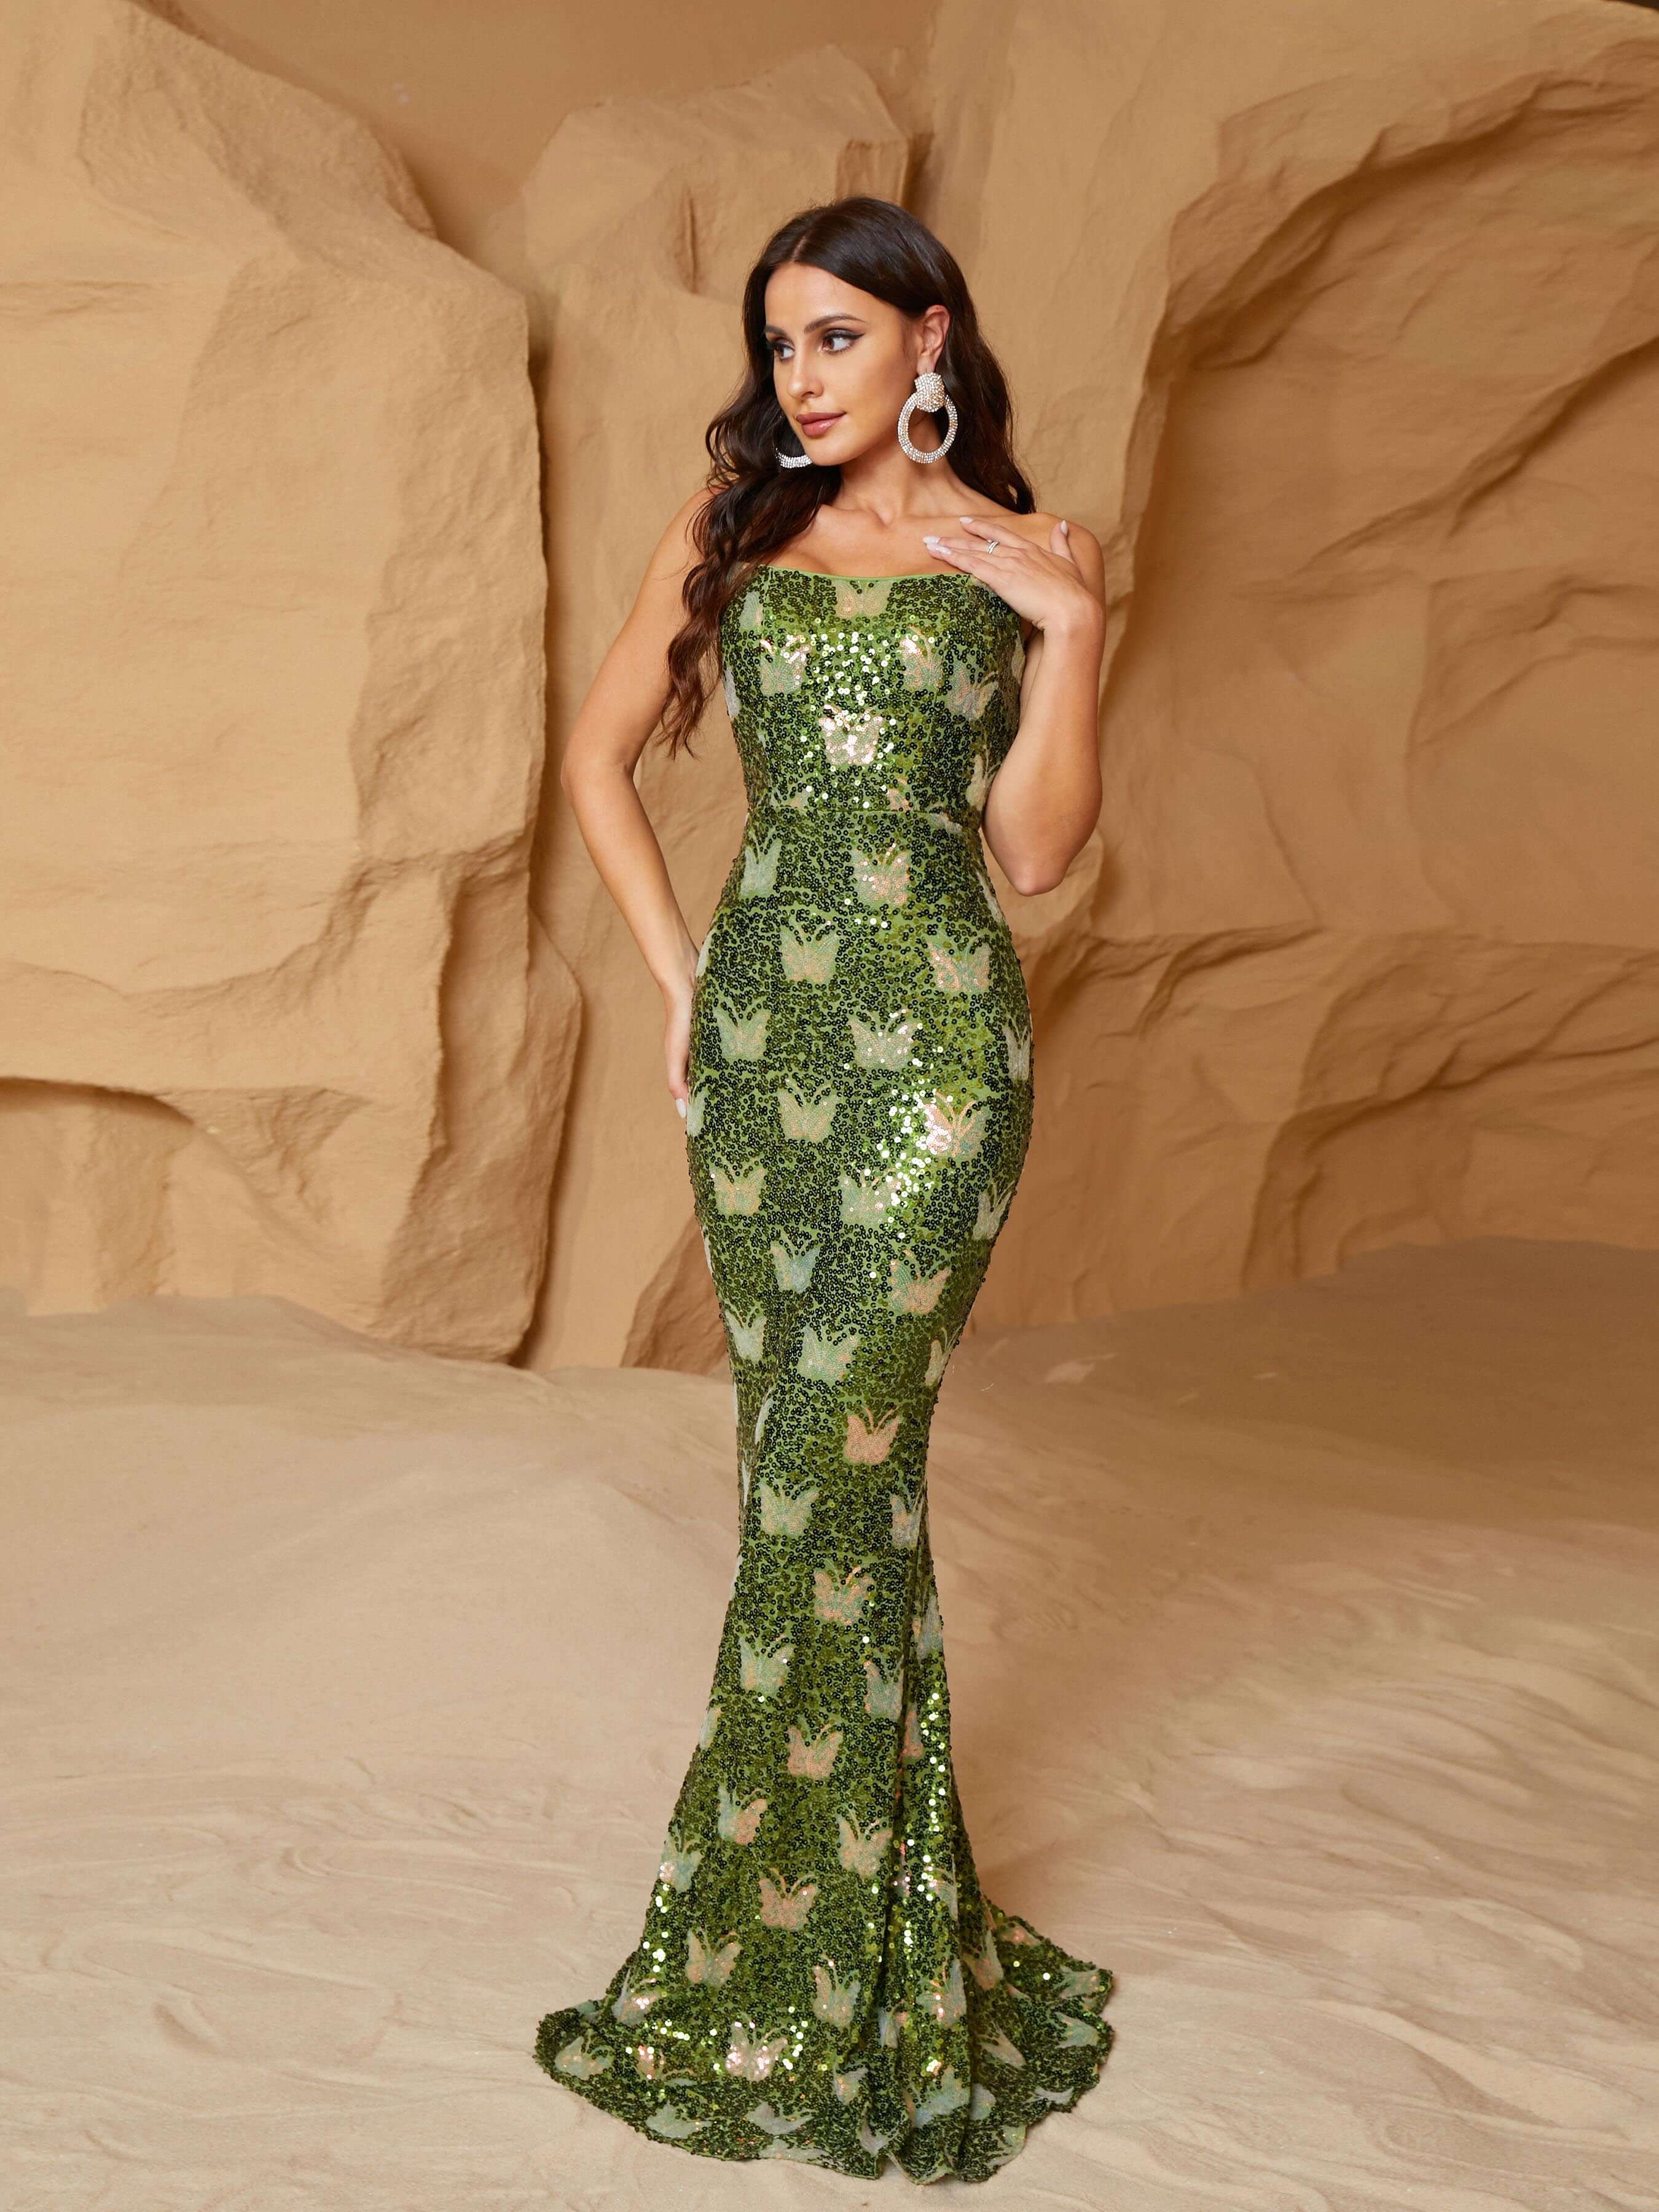 MISSORD Tube Top Backless Green Sequin Prom Dress